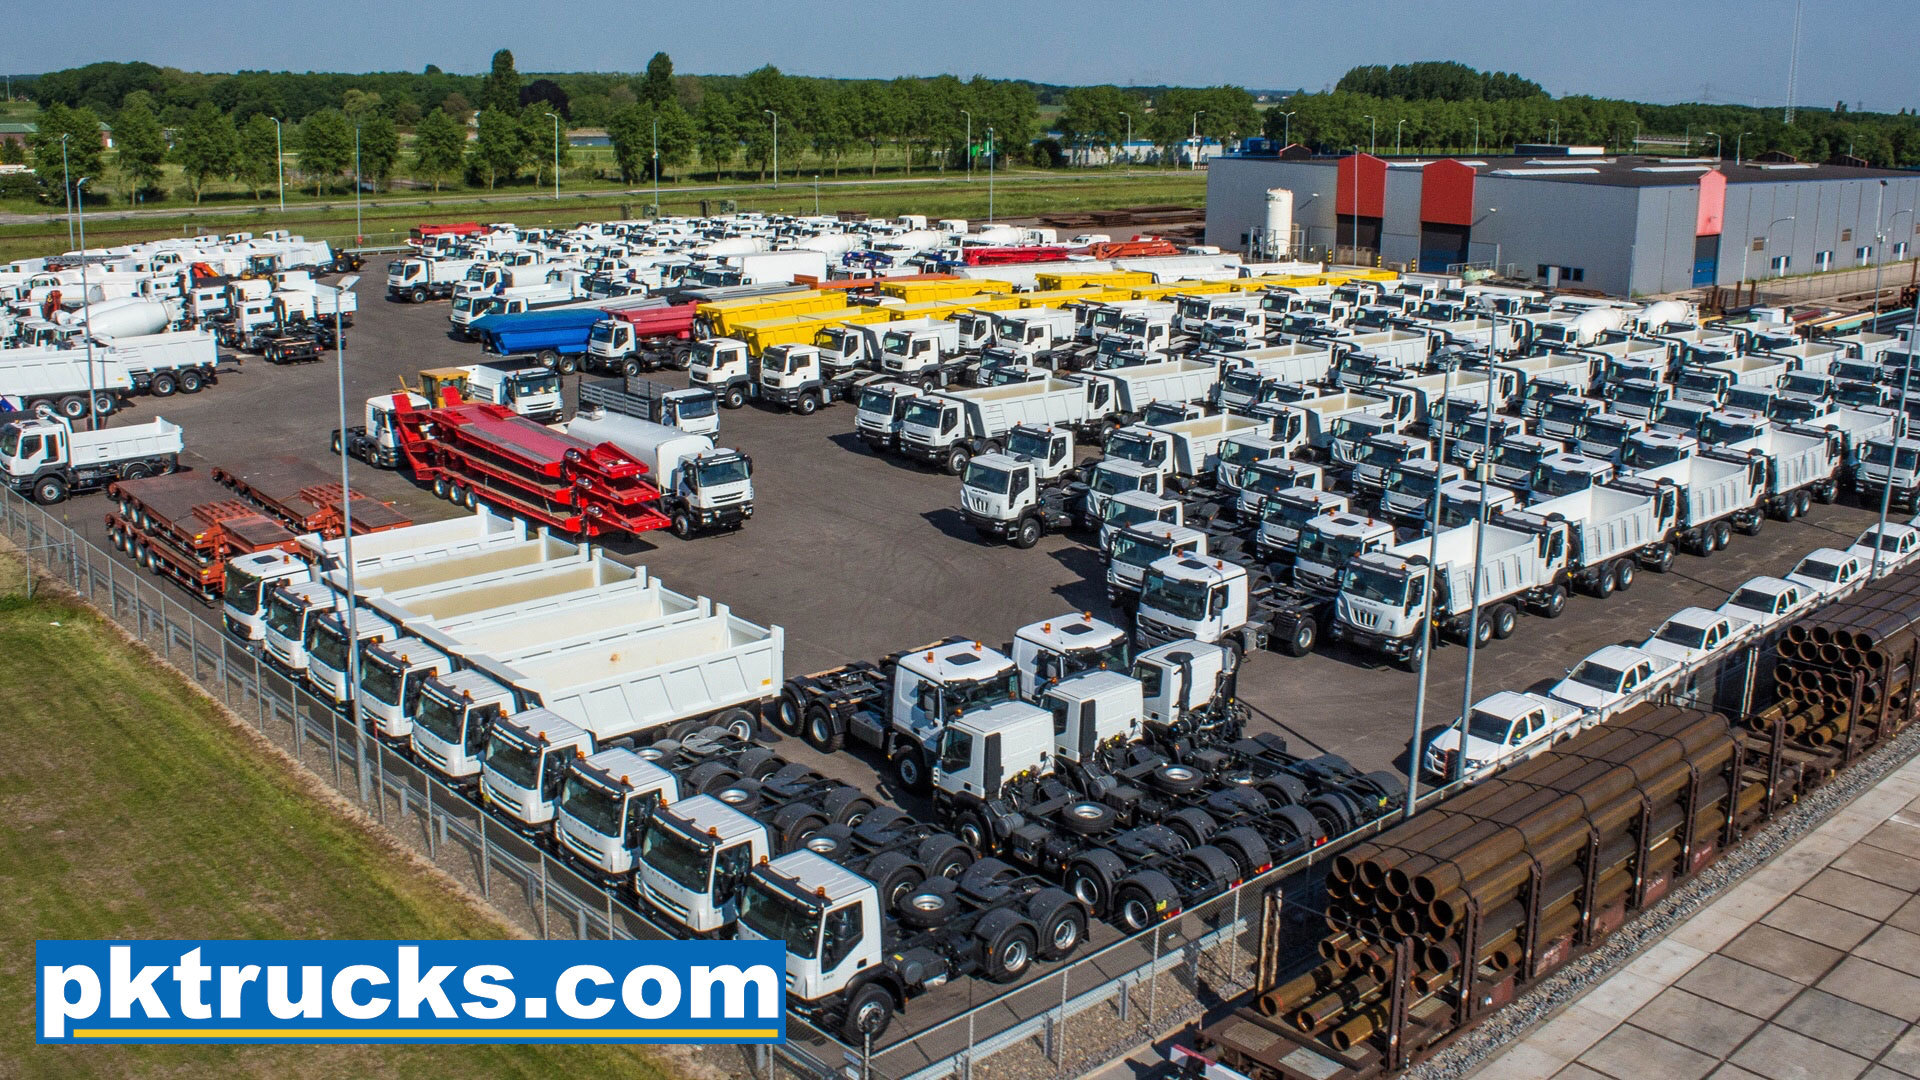 Pk trucks holland undefined: picture 3